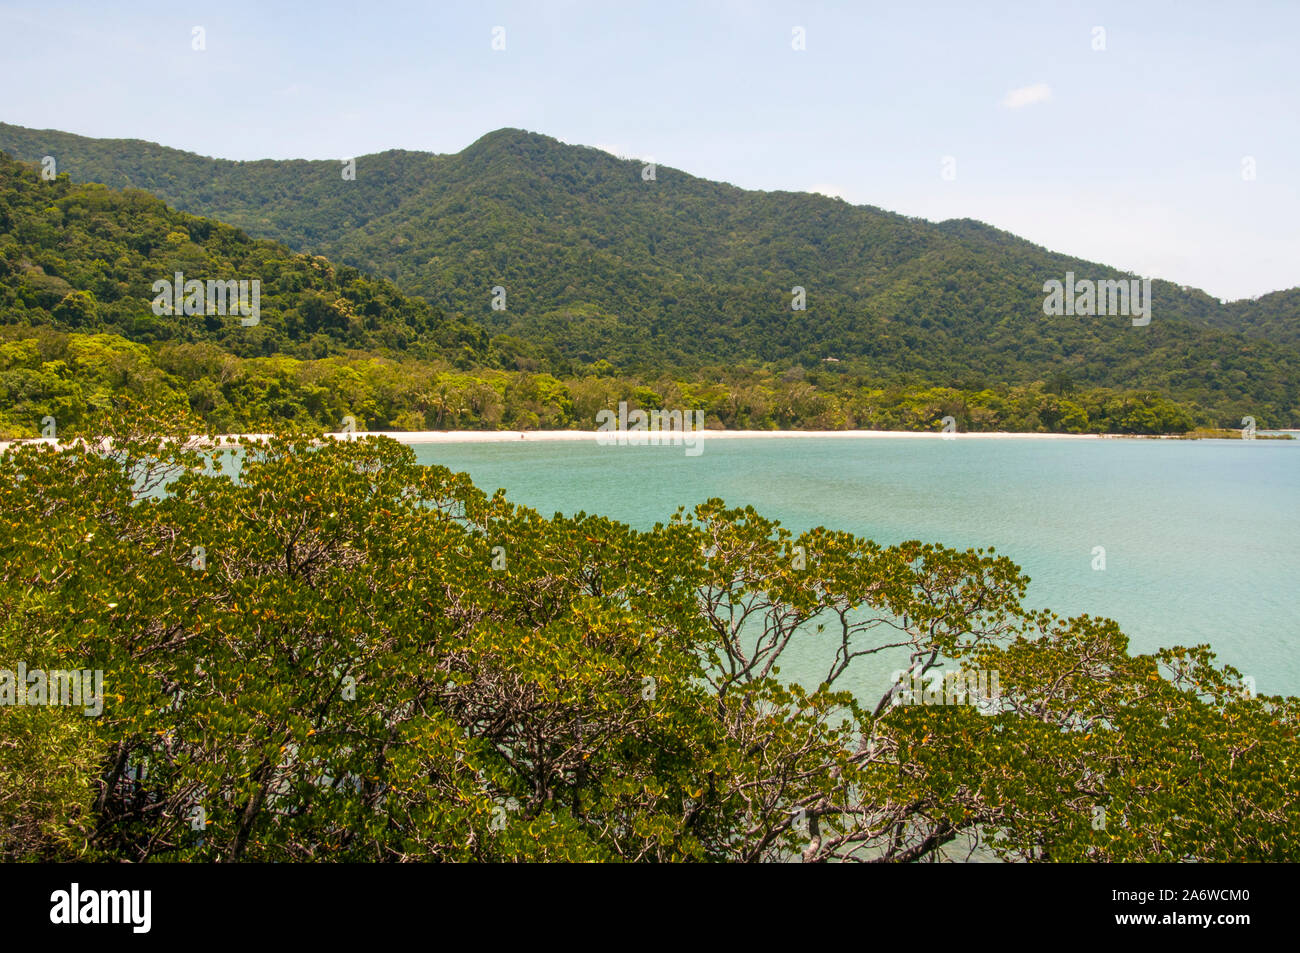 Beach at Cape Tribulation in the Daintree National Park, a World Heritage area in tropical North Queensland, Australia Stock Photo